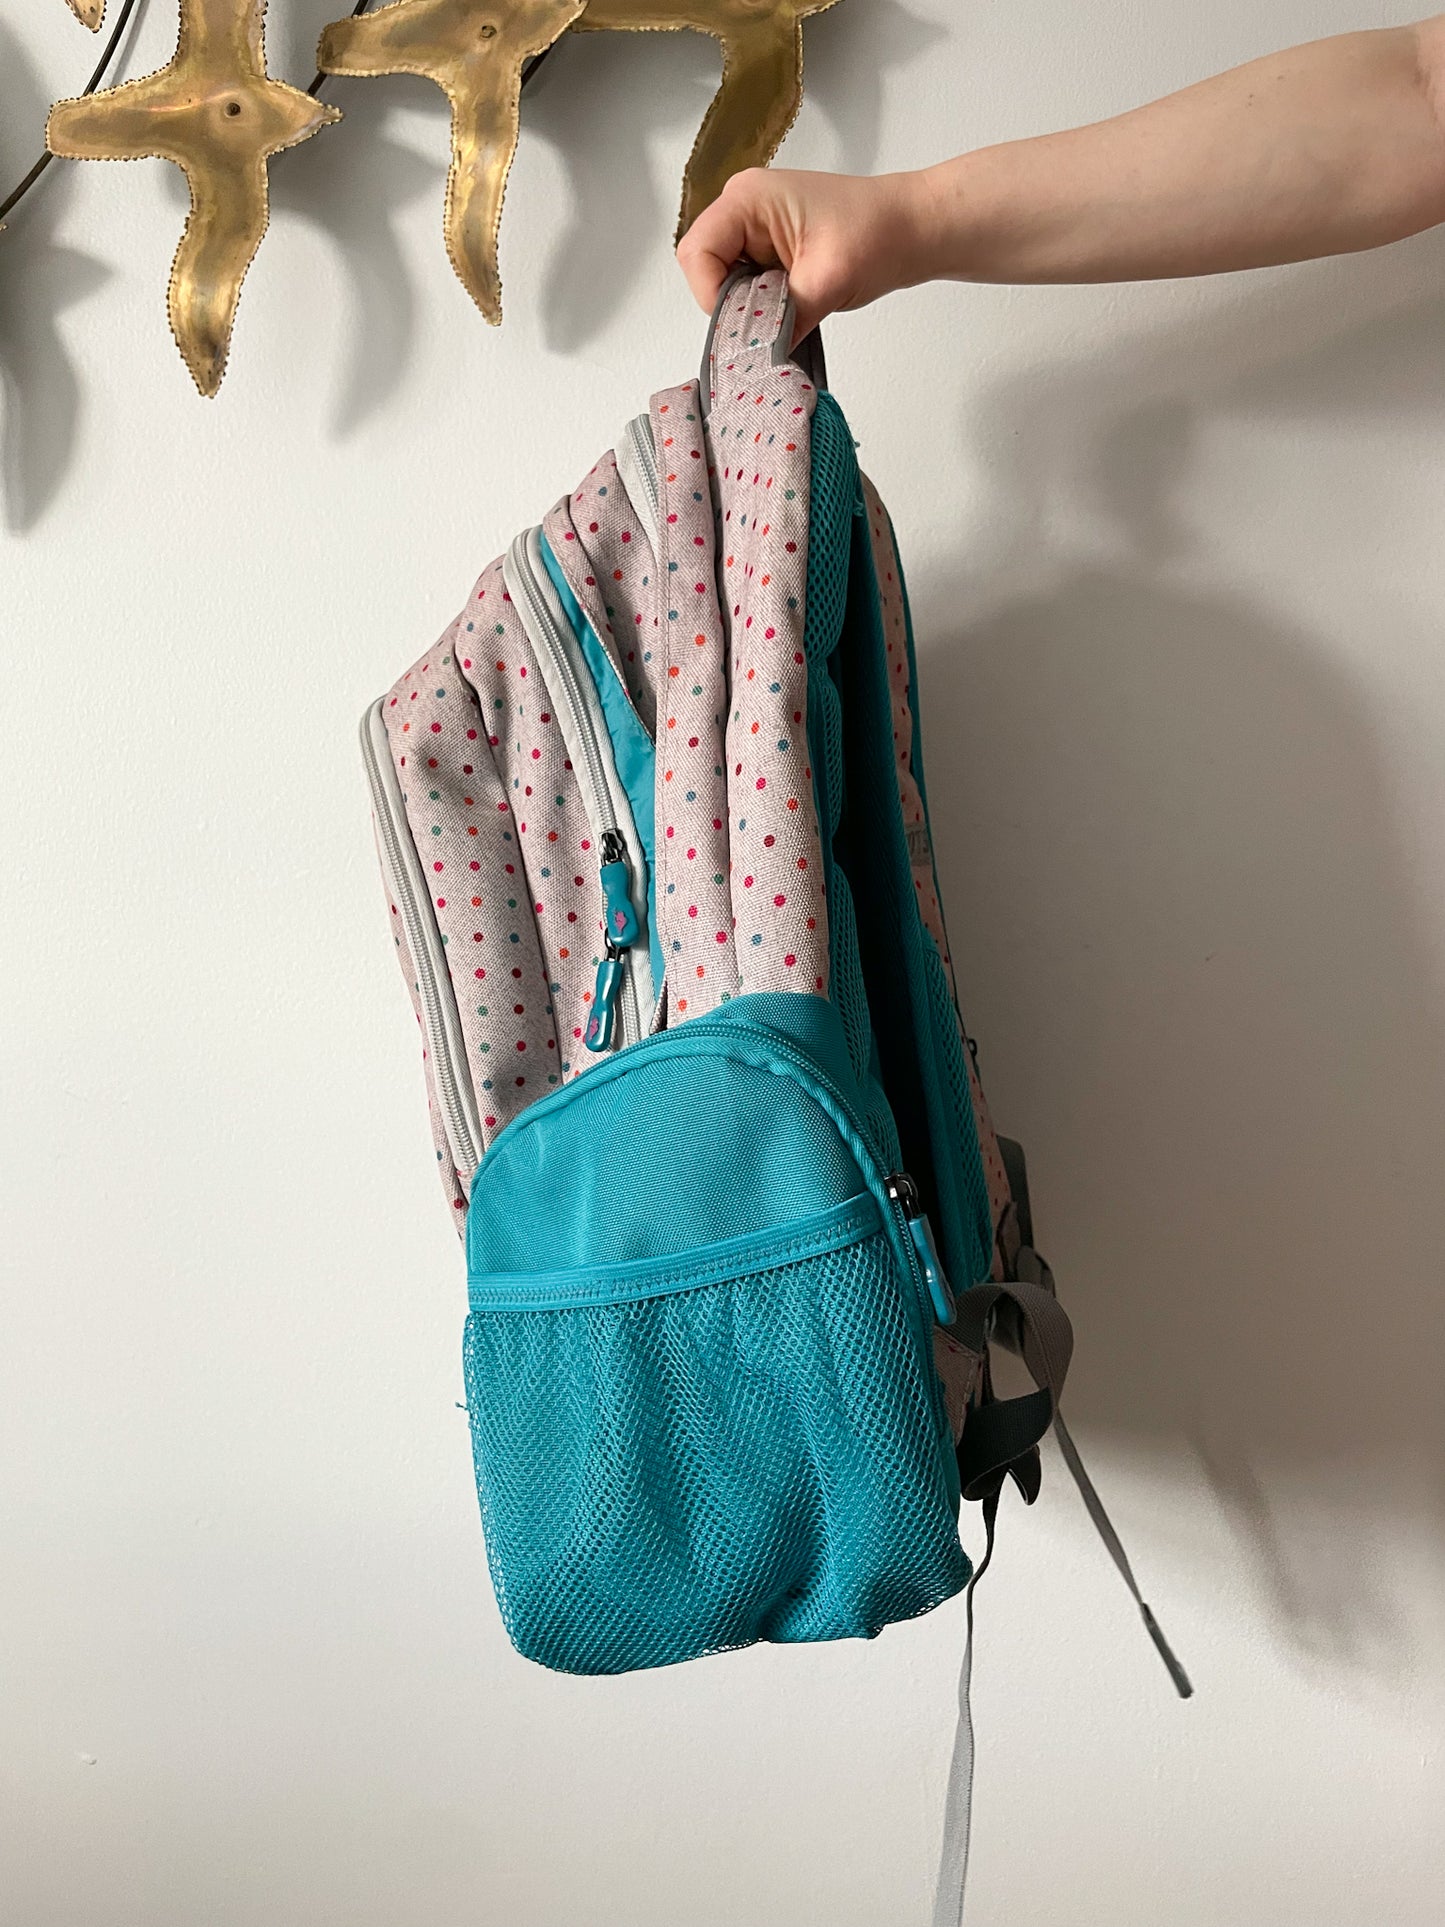 Roots Signature Teal Pink Polkadot Lightweight Laptop Backpack